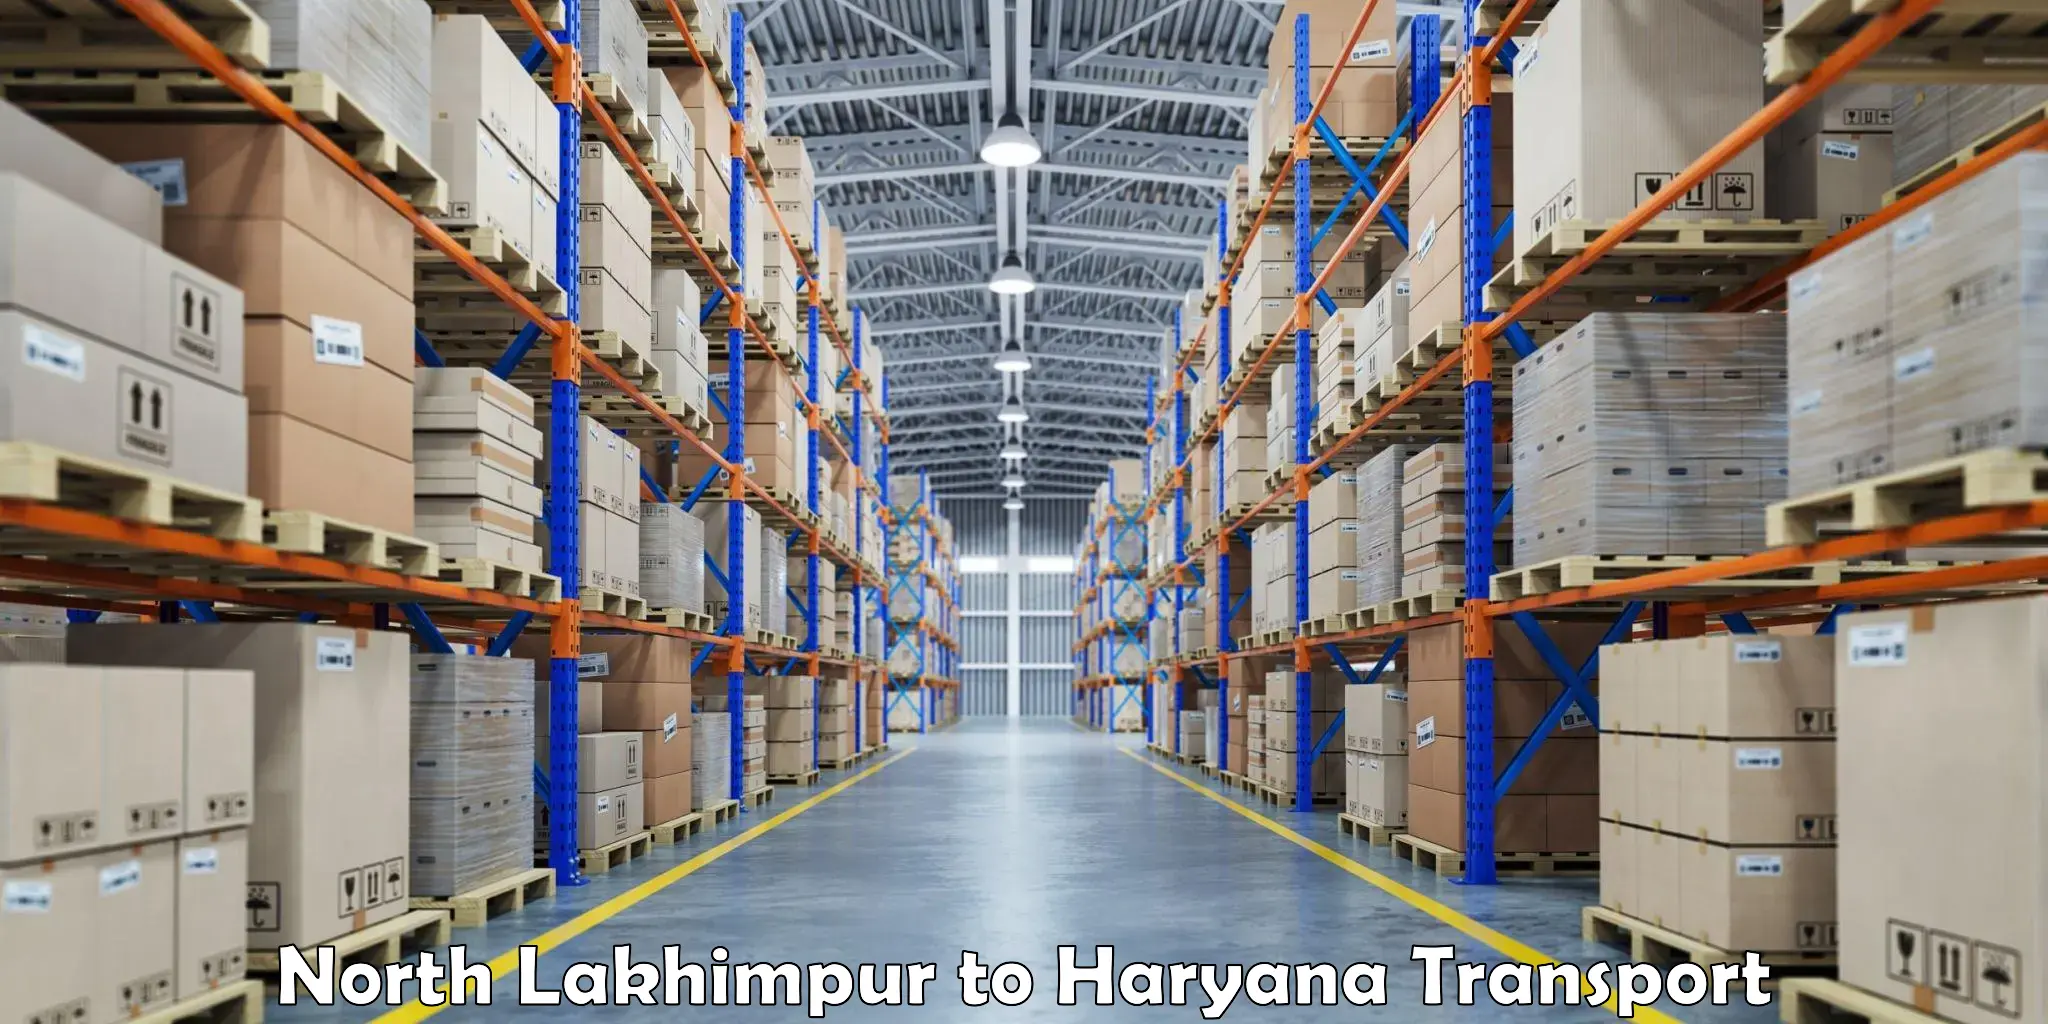 Air cargo transport services in North Lakhimpur to Karnal